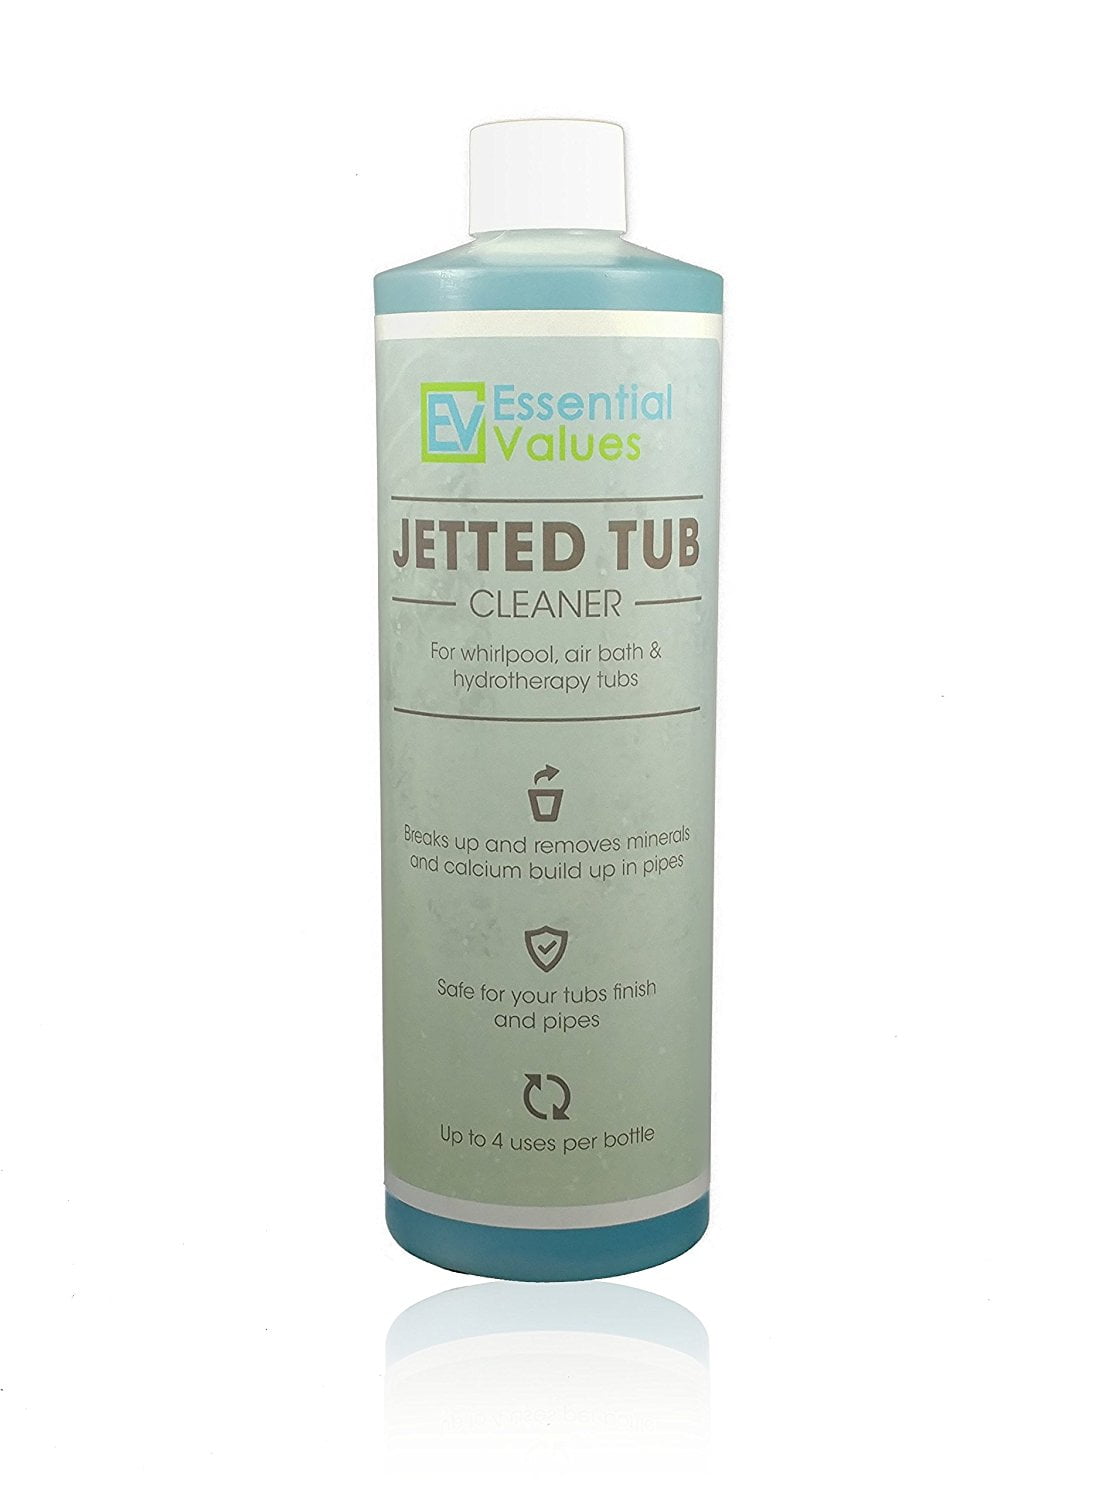 Jetted Tub Cleaner, Whirlpool Tub Cleaner (16oz / 4 uses ...